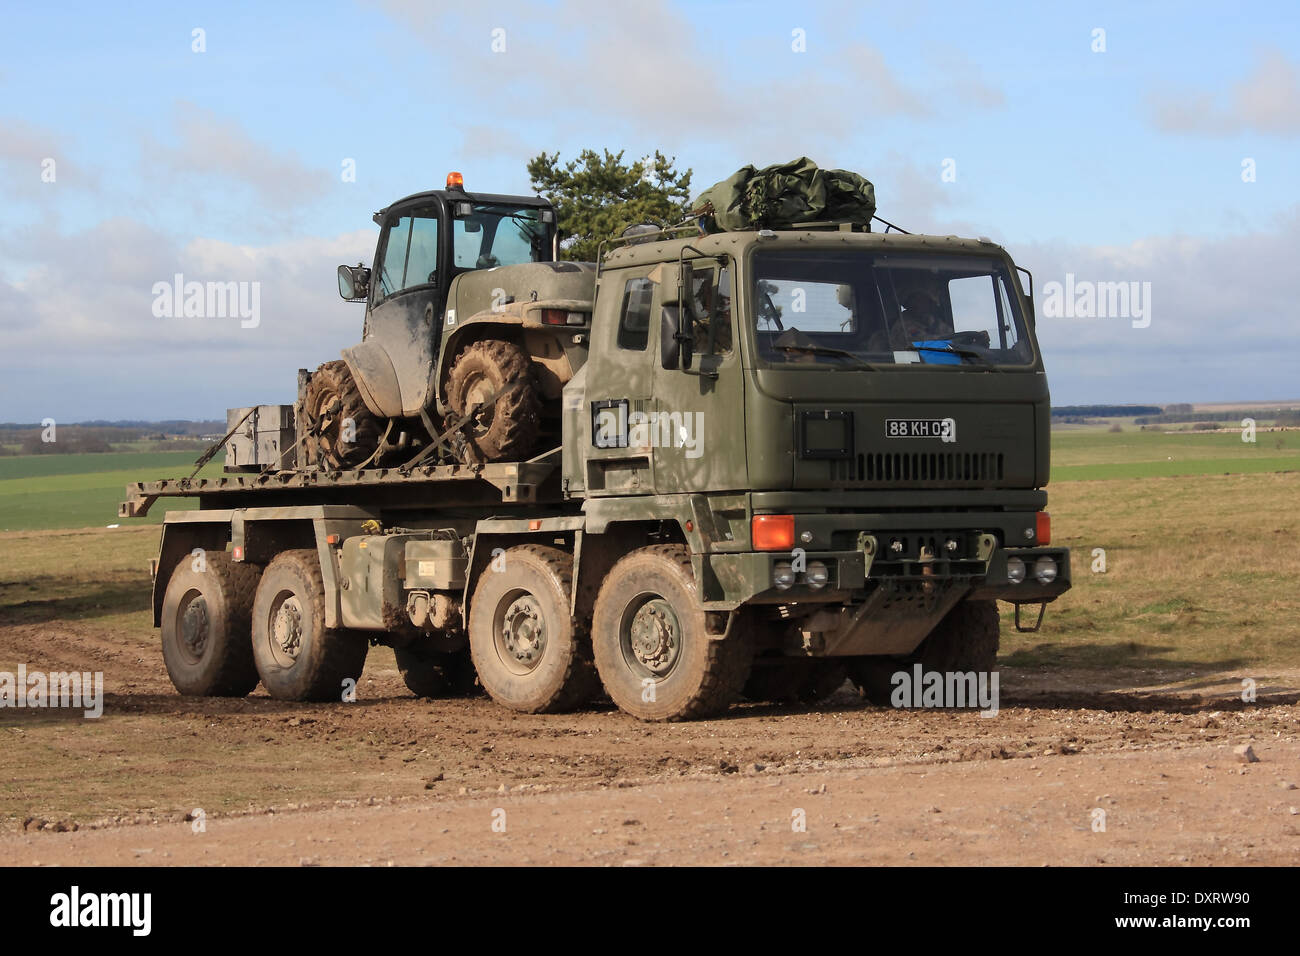 British Army Demountable Rack Offload and Pickup System (DROPS) vehicle Stock Photo